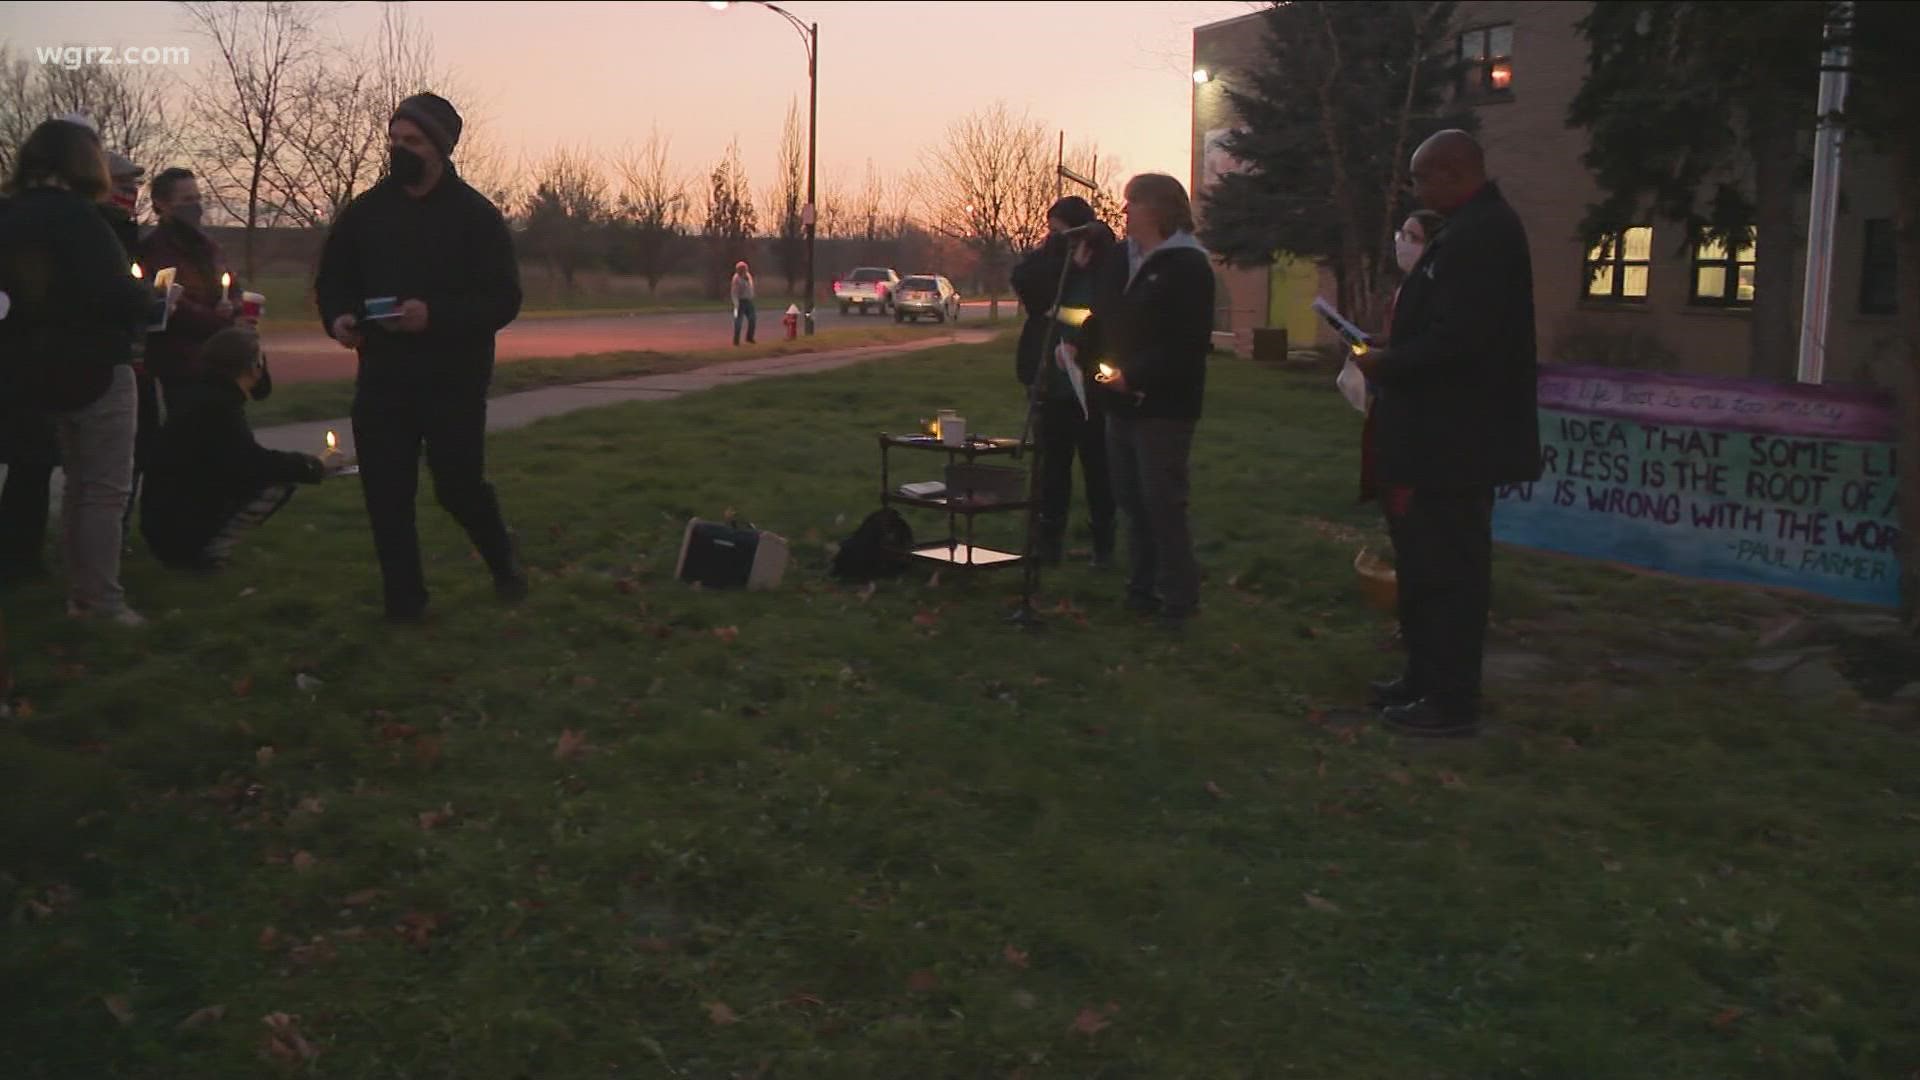 Organizers at the Matt Urban Hope Center in Buffalo and the Western New York coalition for the homeless, gathered to remember the homeless who passed away.